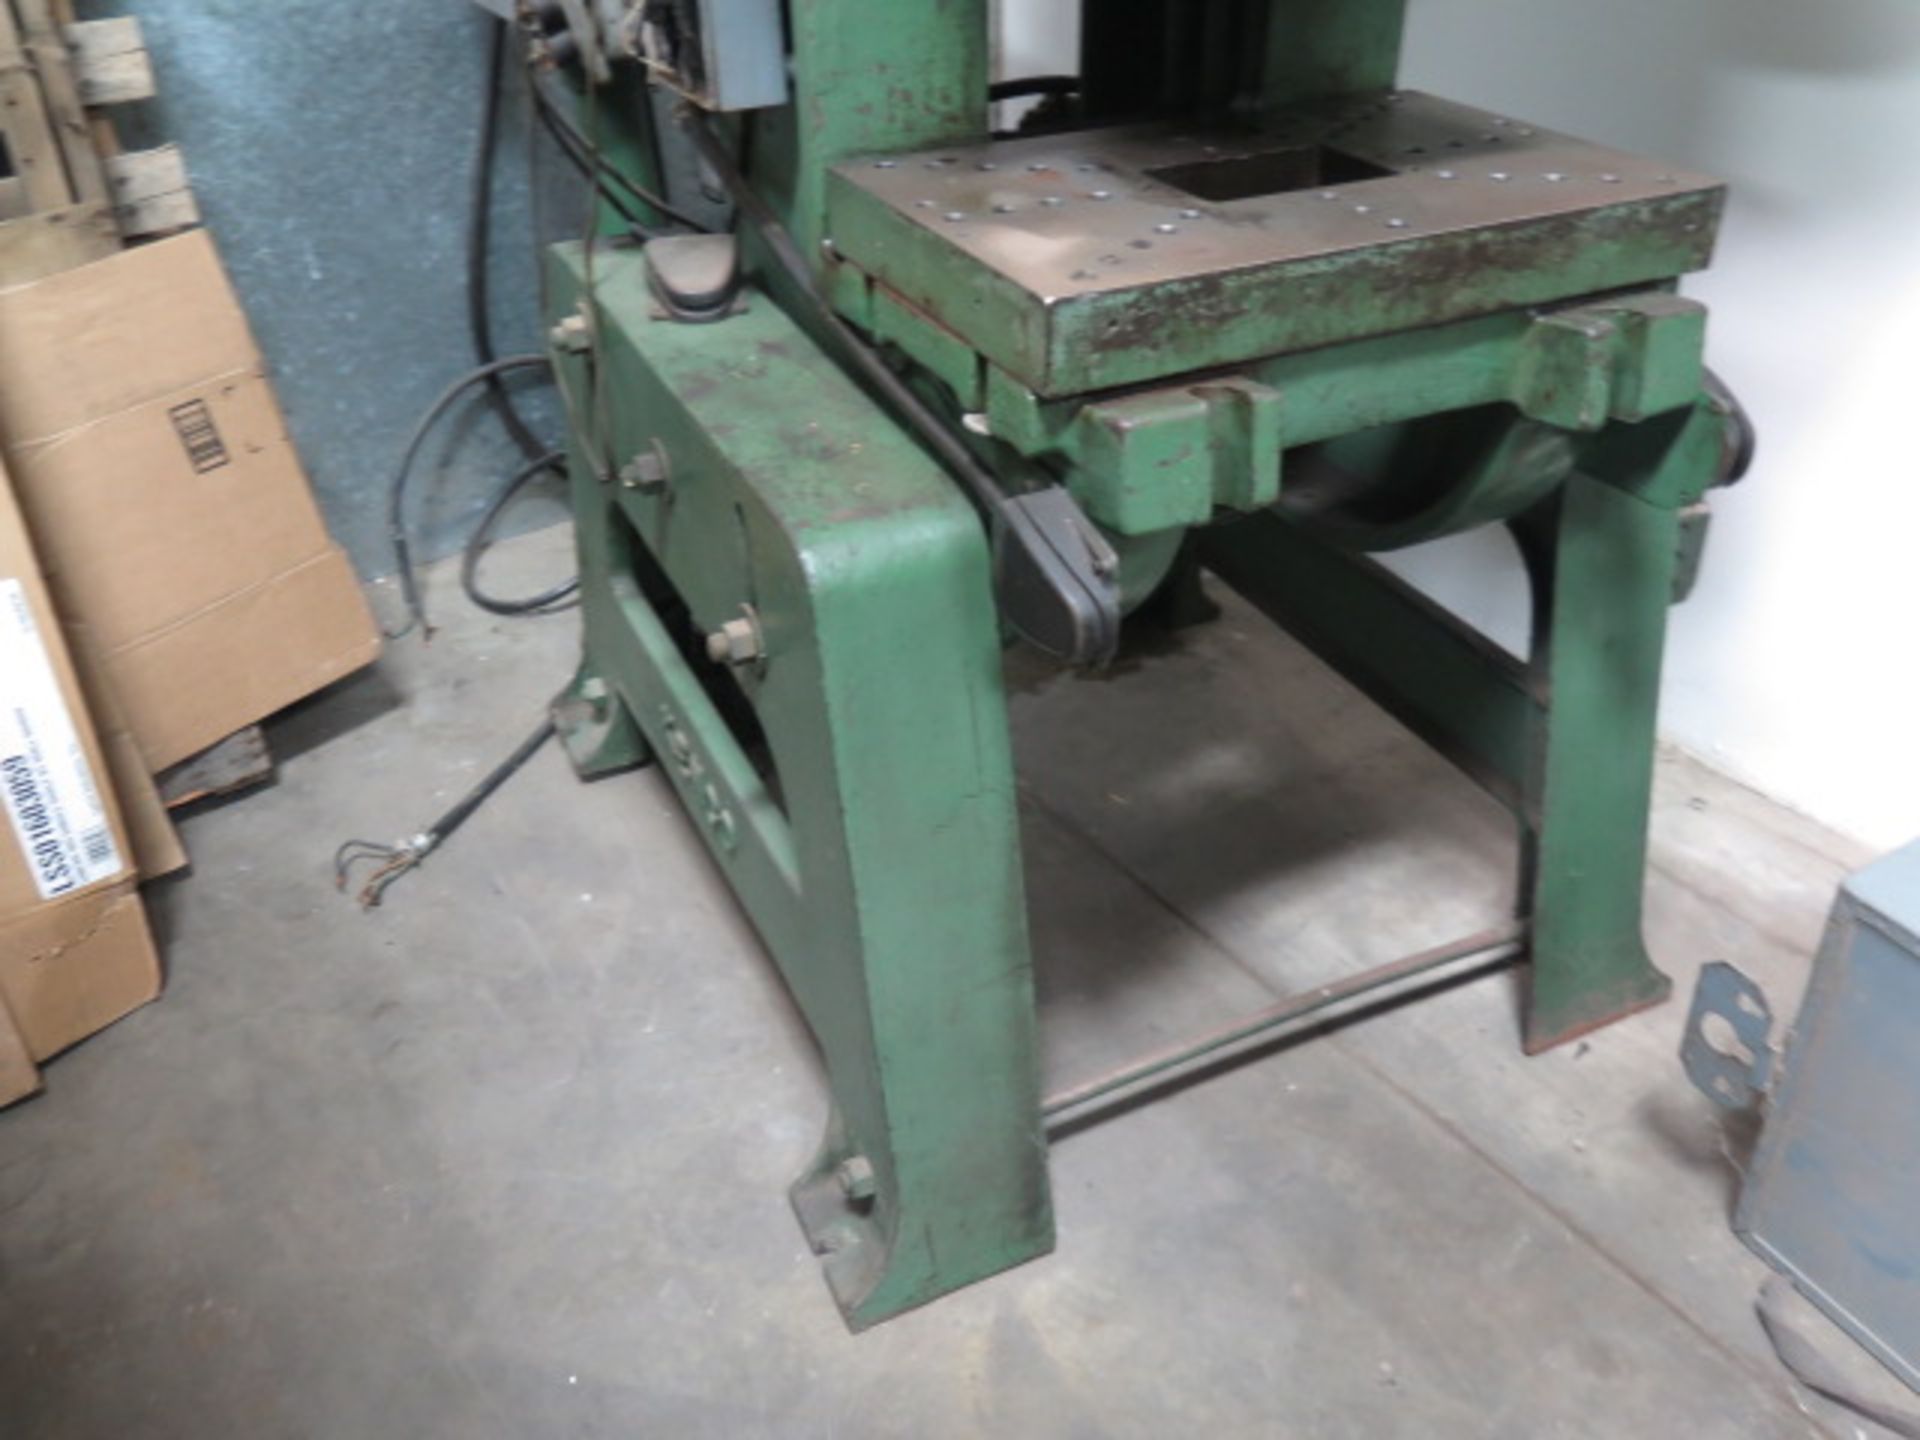 Kenco 32-301 32 Ton OBI Stamping Press s/n 32-25-1065 w/ 14” x 22” Bolster Area (SOLD AS-IS) - Image 5 of 8